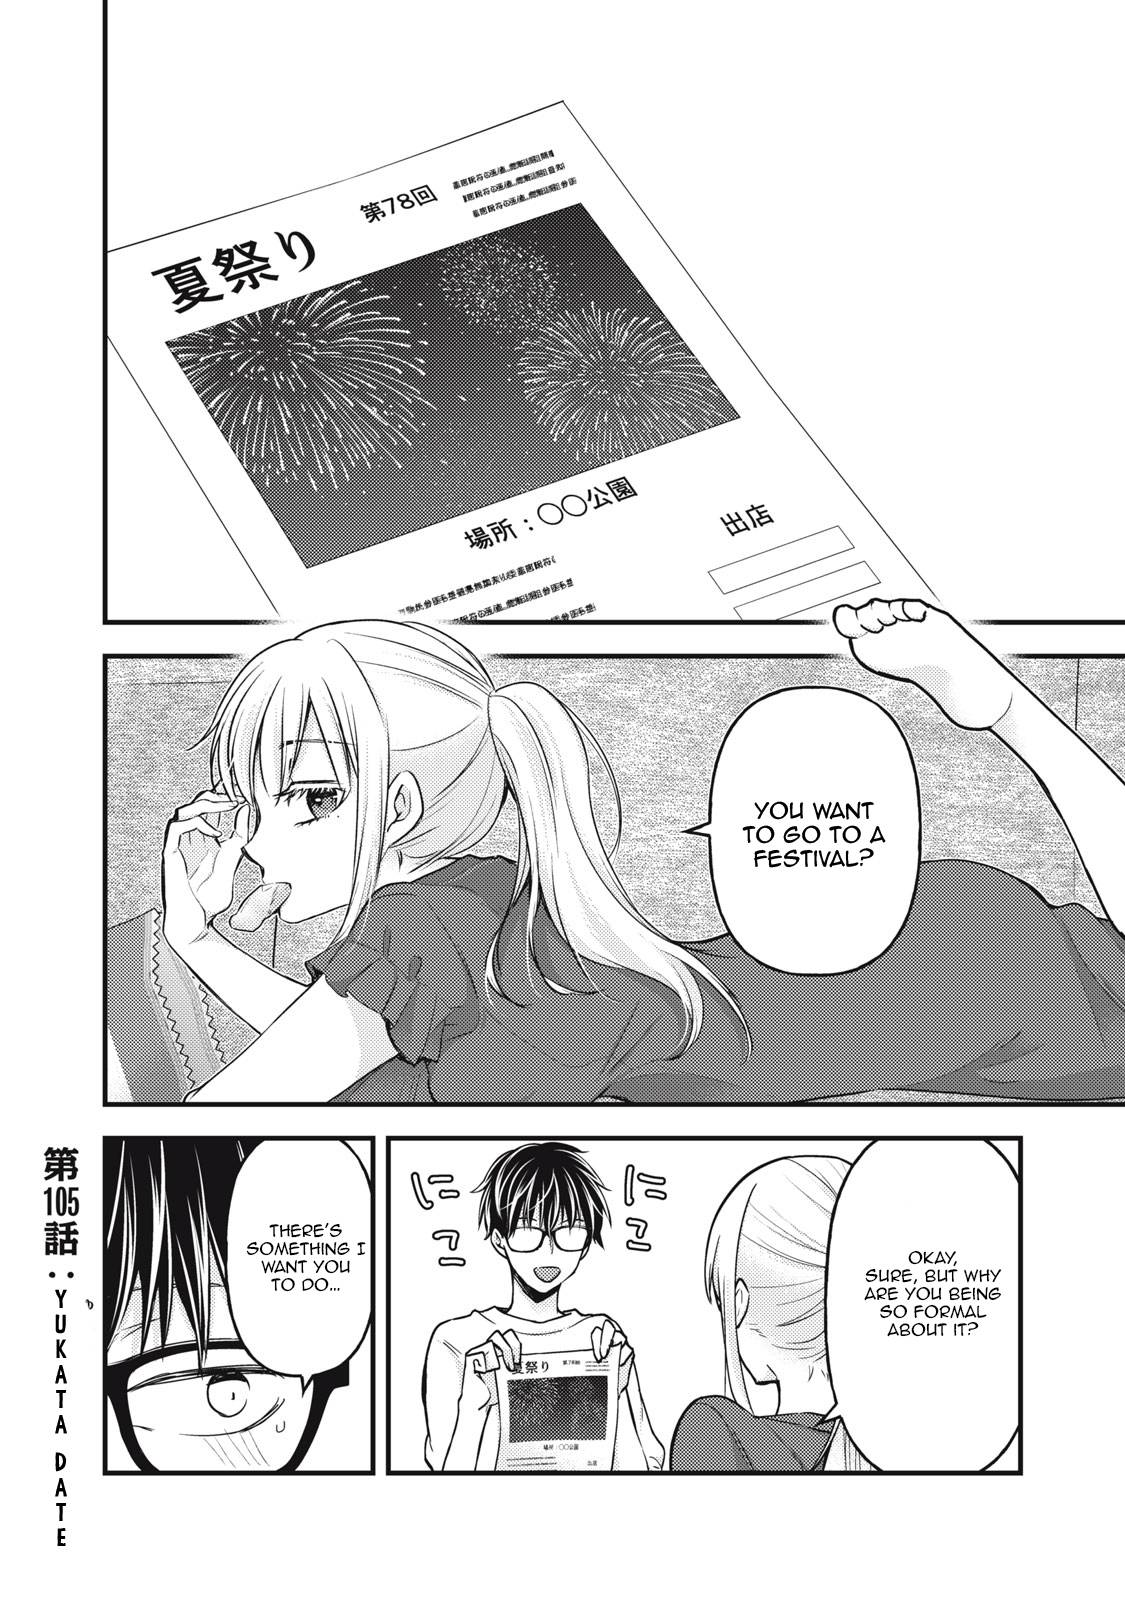 We May Be An Inexperienced Couple But... - chapter 105 - #2